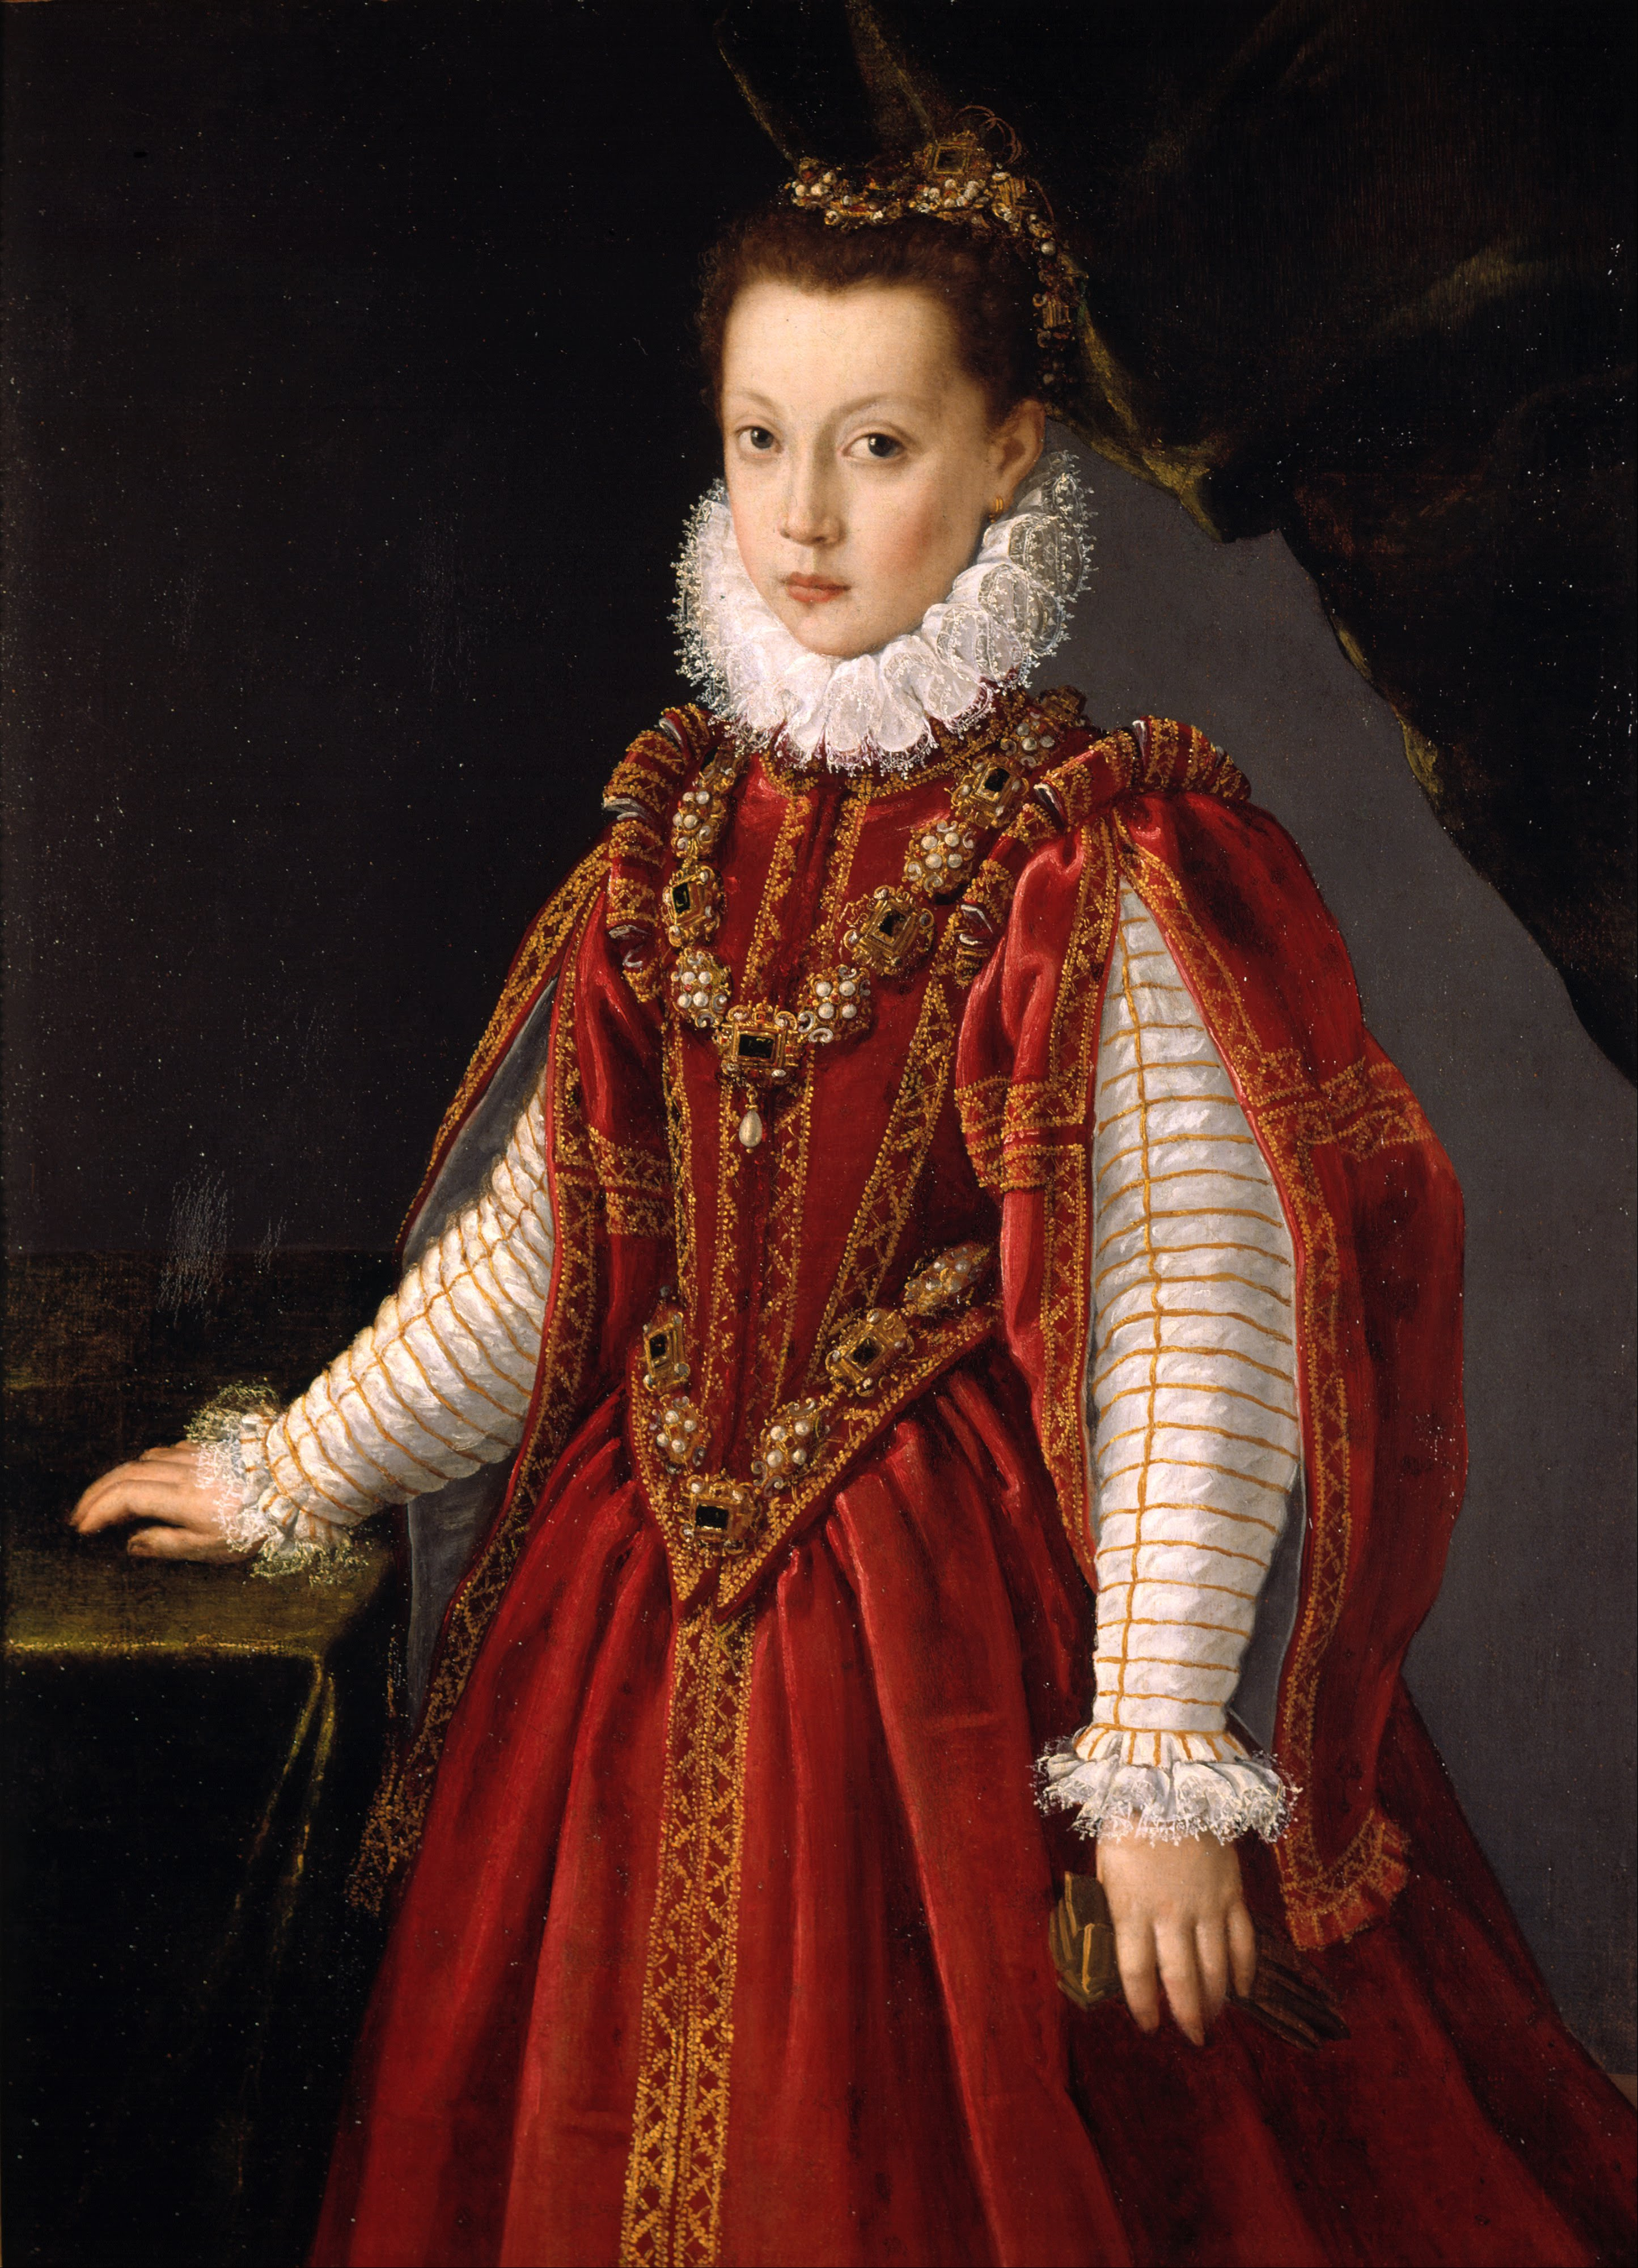 Portrait of a Young Lady by Sofonisba Anguissola - 1560 - 67.5 x 106 cm Museo Lázaro Galdiano